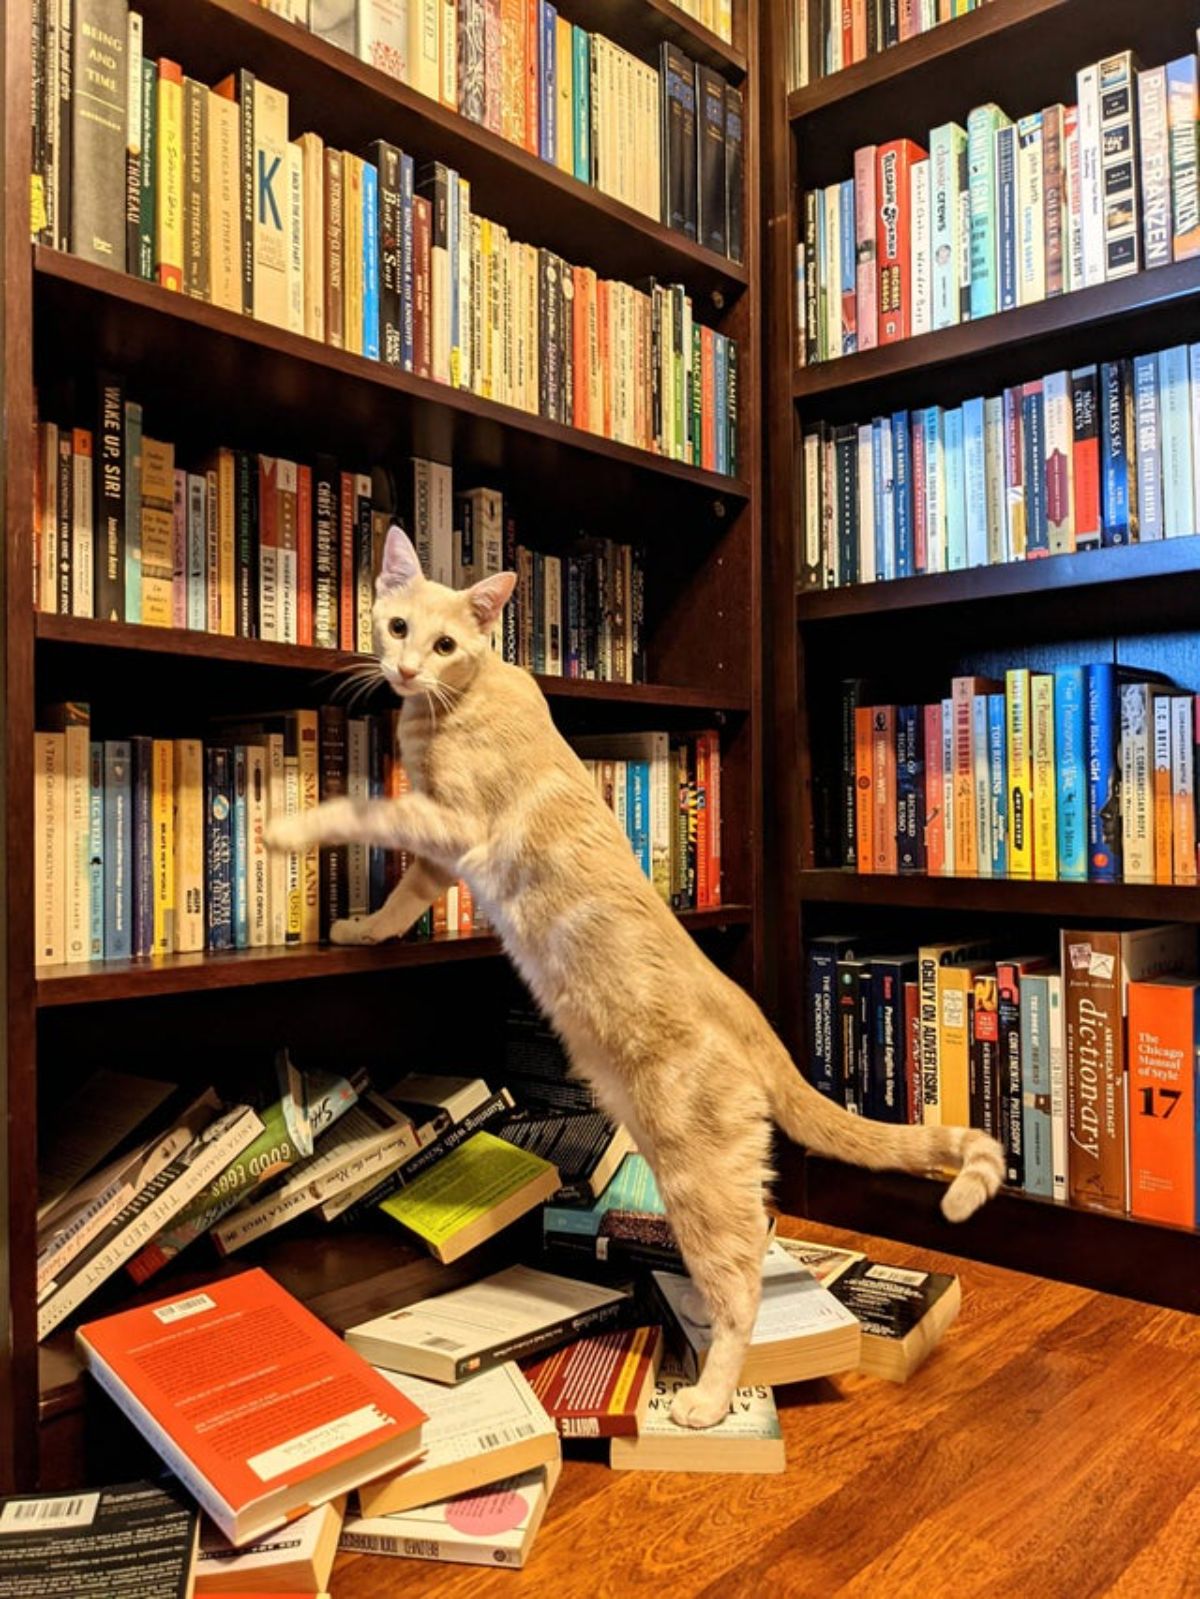 orange and whtie cat standing on hind legs surrounded by bookshelves with a pile of books on the floor